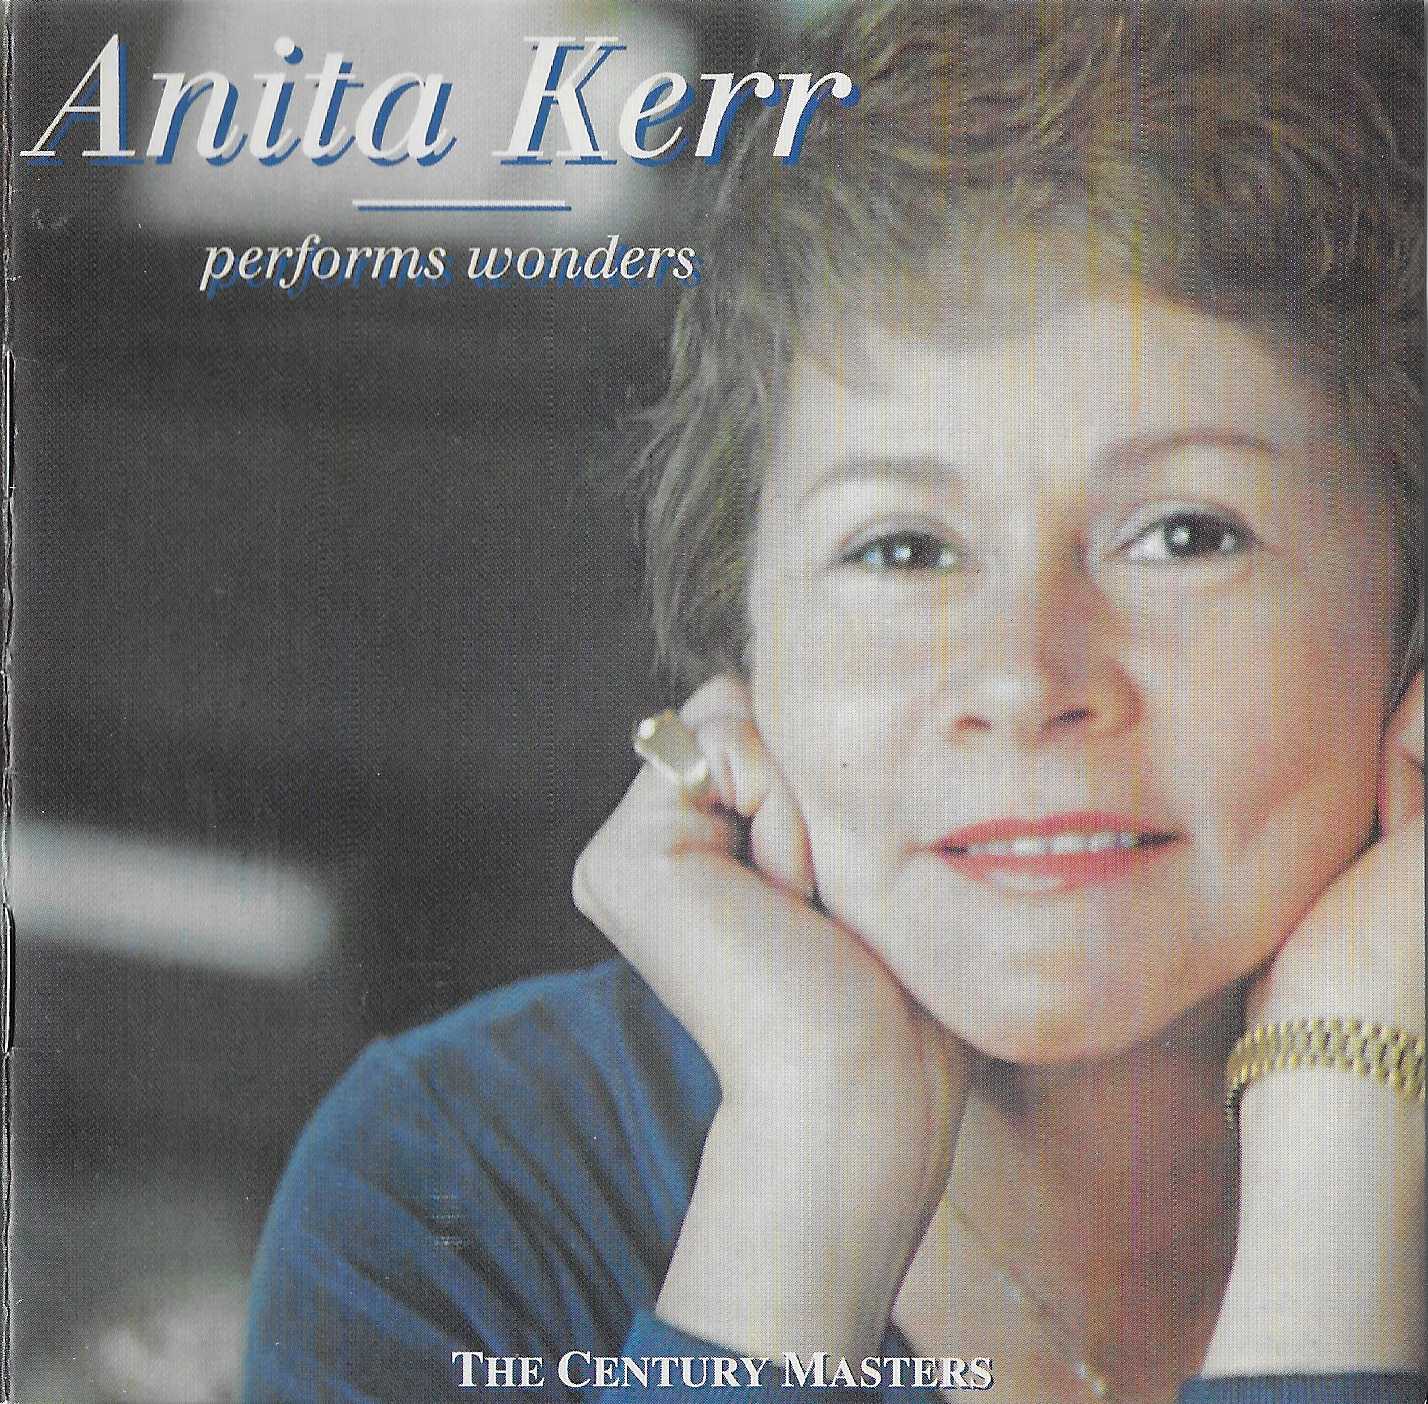 Picture of CJCD 836 The Century Catalogue - Lookin' for another pure love - The Anita Kerr Singers by artist Stevie Wonder / Anita Kerr from the BBC cds - Records and Tapes library